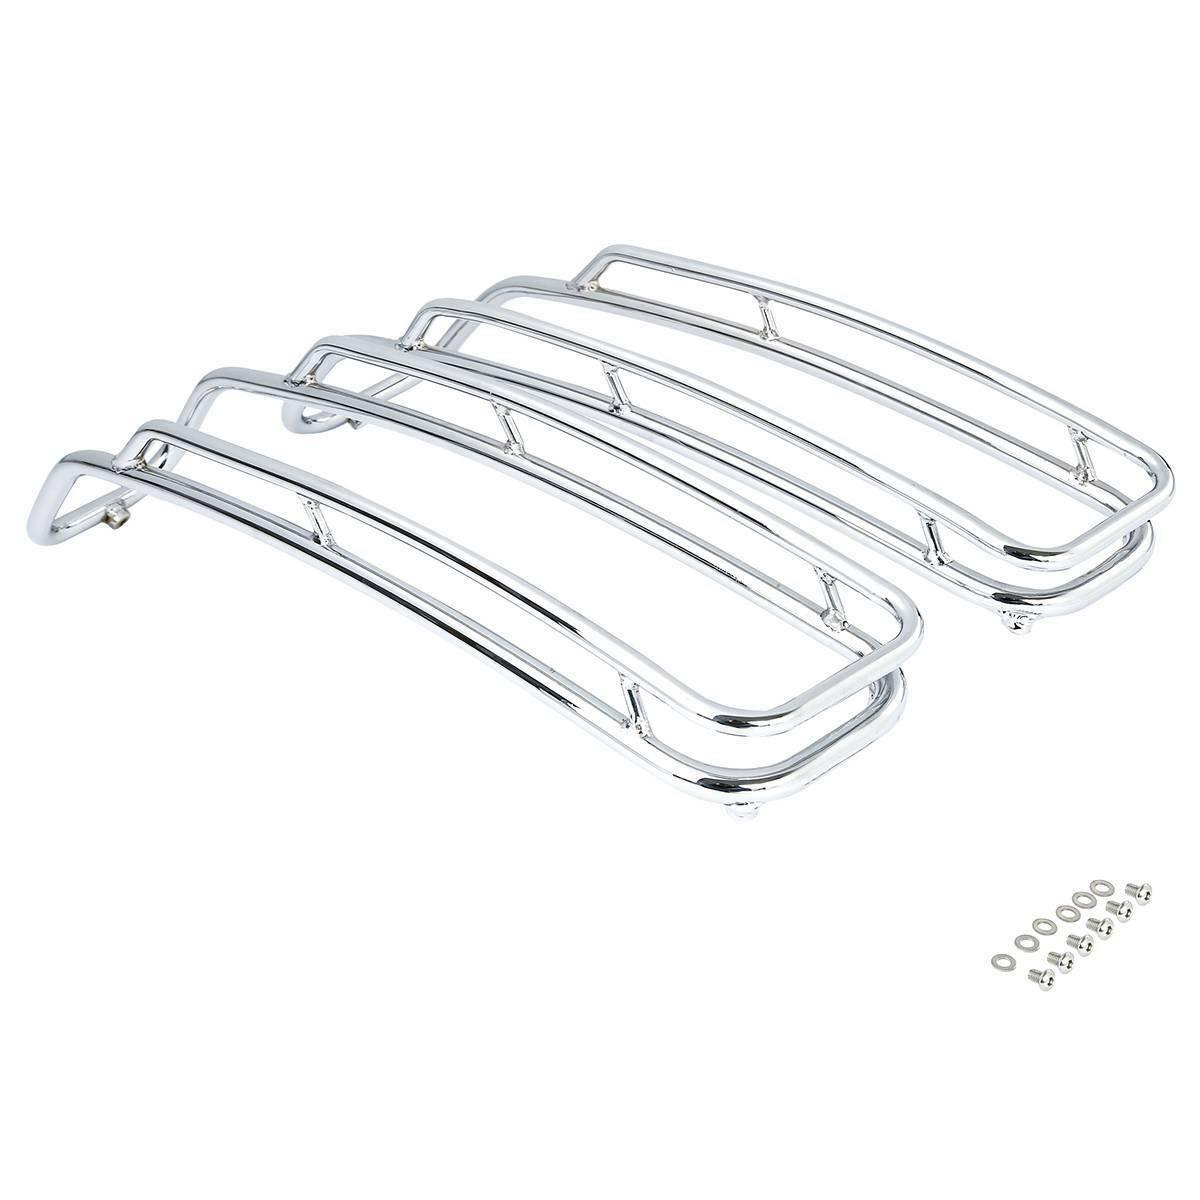 Chrome Saddlebags Lid Top Rail Guards Fit For Harley Electra Road Glide 14-22 18 - Moto Life Products